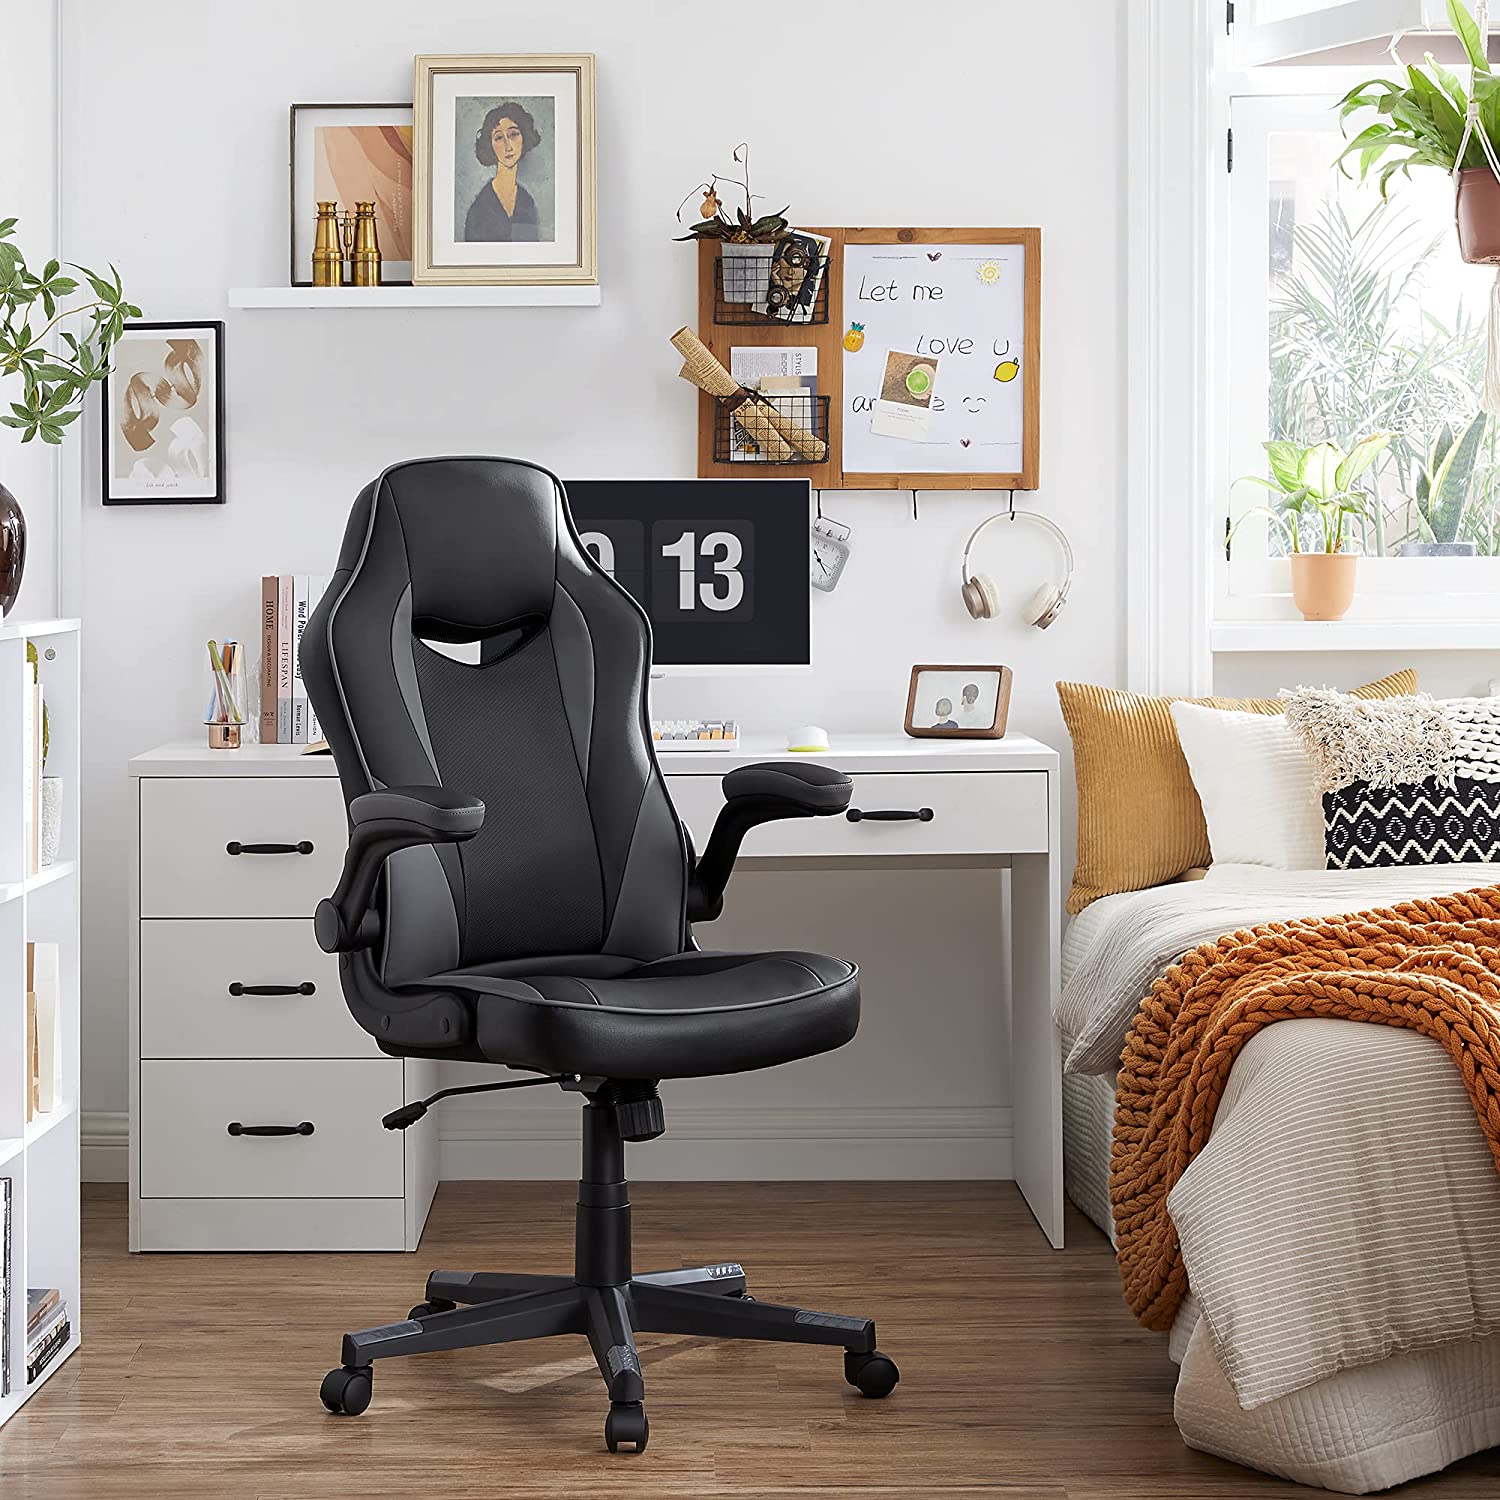 Nancy's Cooperage Office chair - Swivel chair - Ergonomic - Height adjustable - Faux leather - Plastic - Black 0 75 x 64 x (110-120) cm 